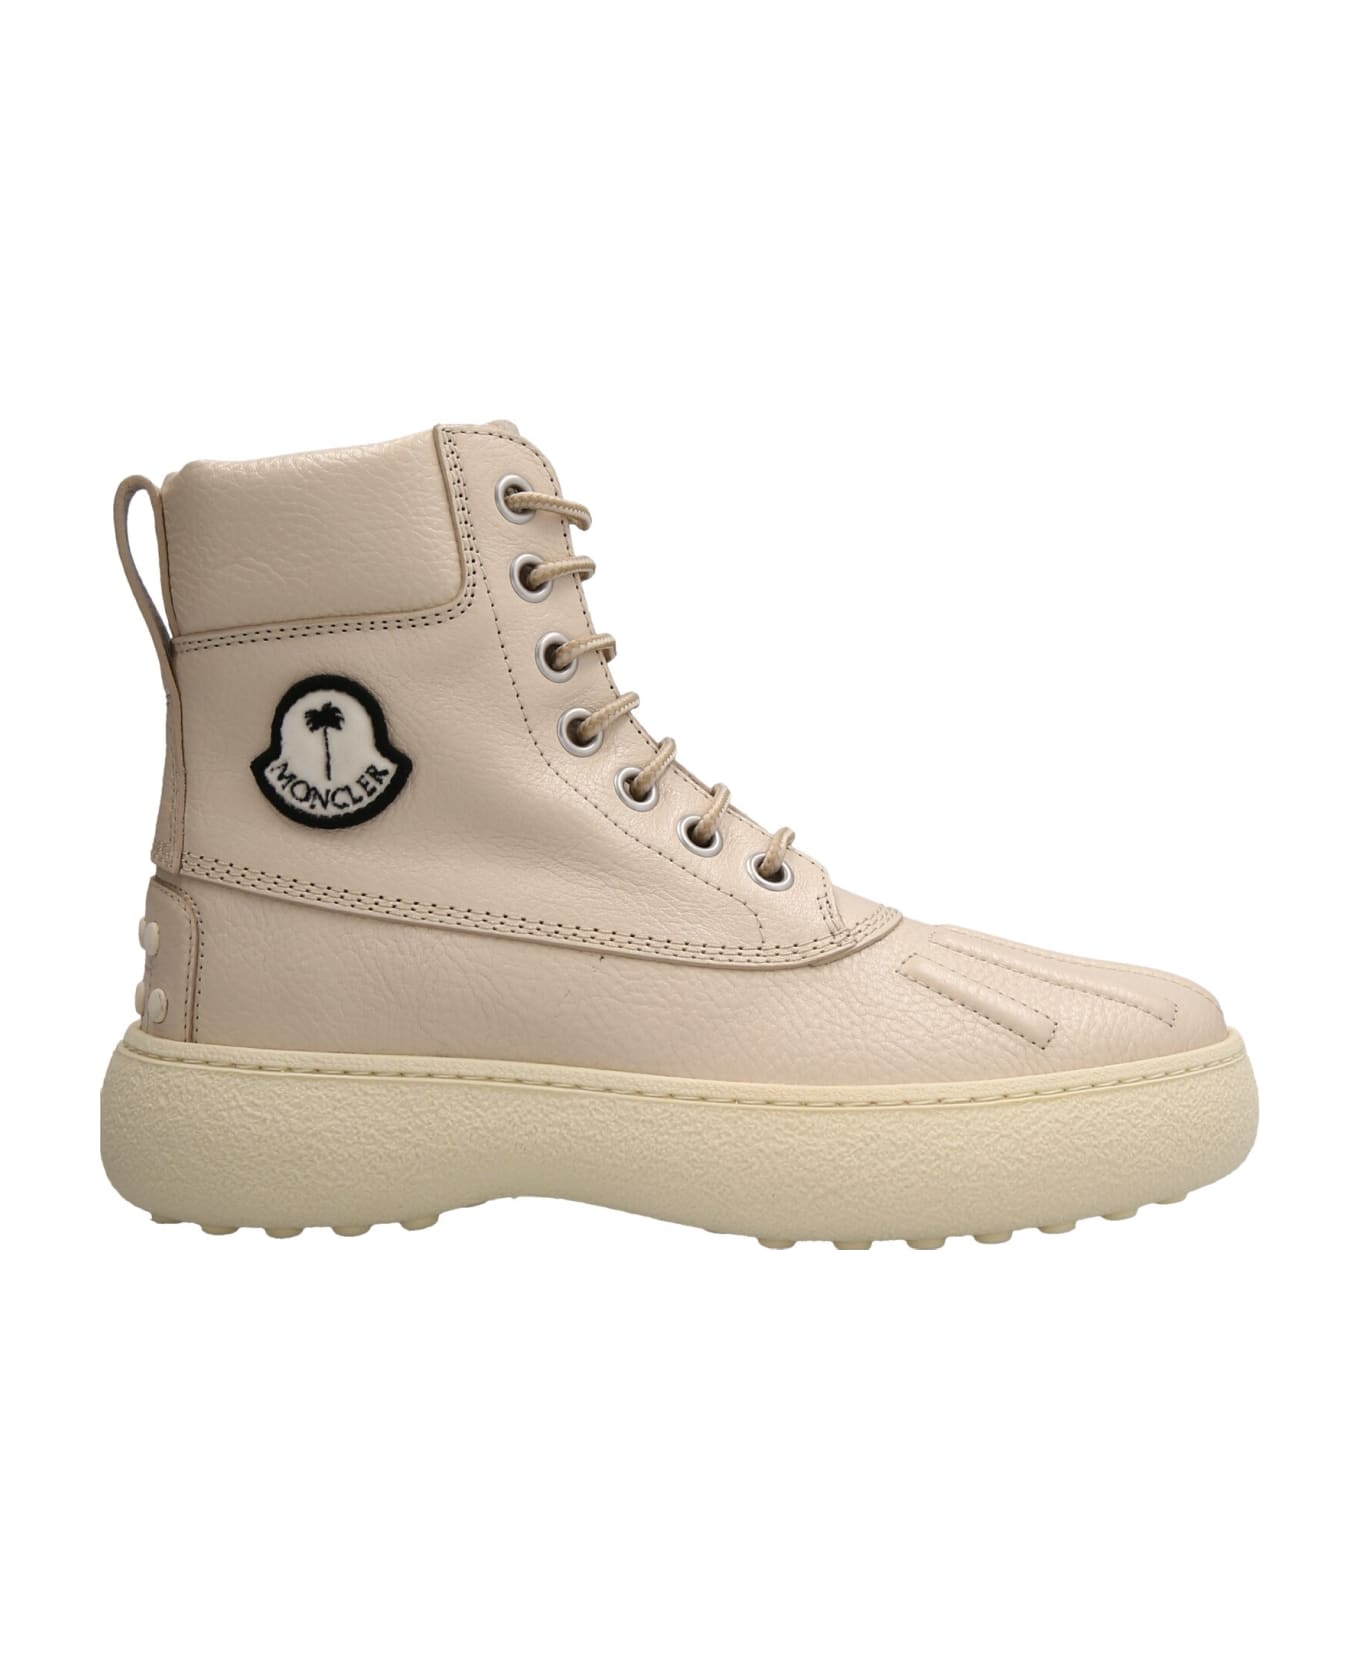 Moncler Genius Ankle Boot 'winter Gommino Mid' Moncler Genius X Palm Angels X Tod's - Beige